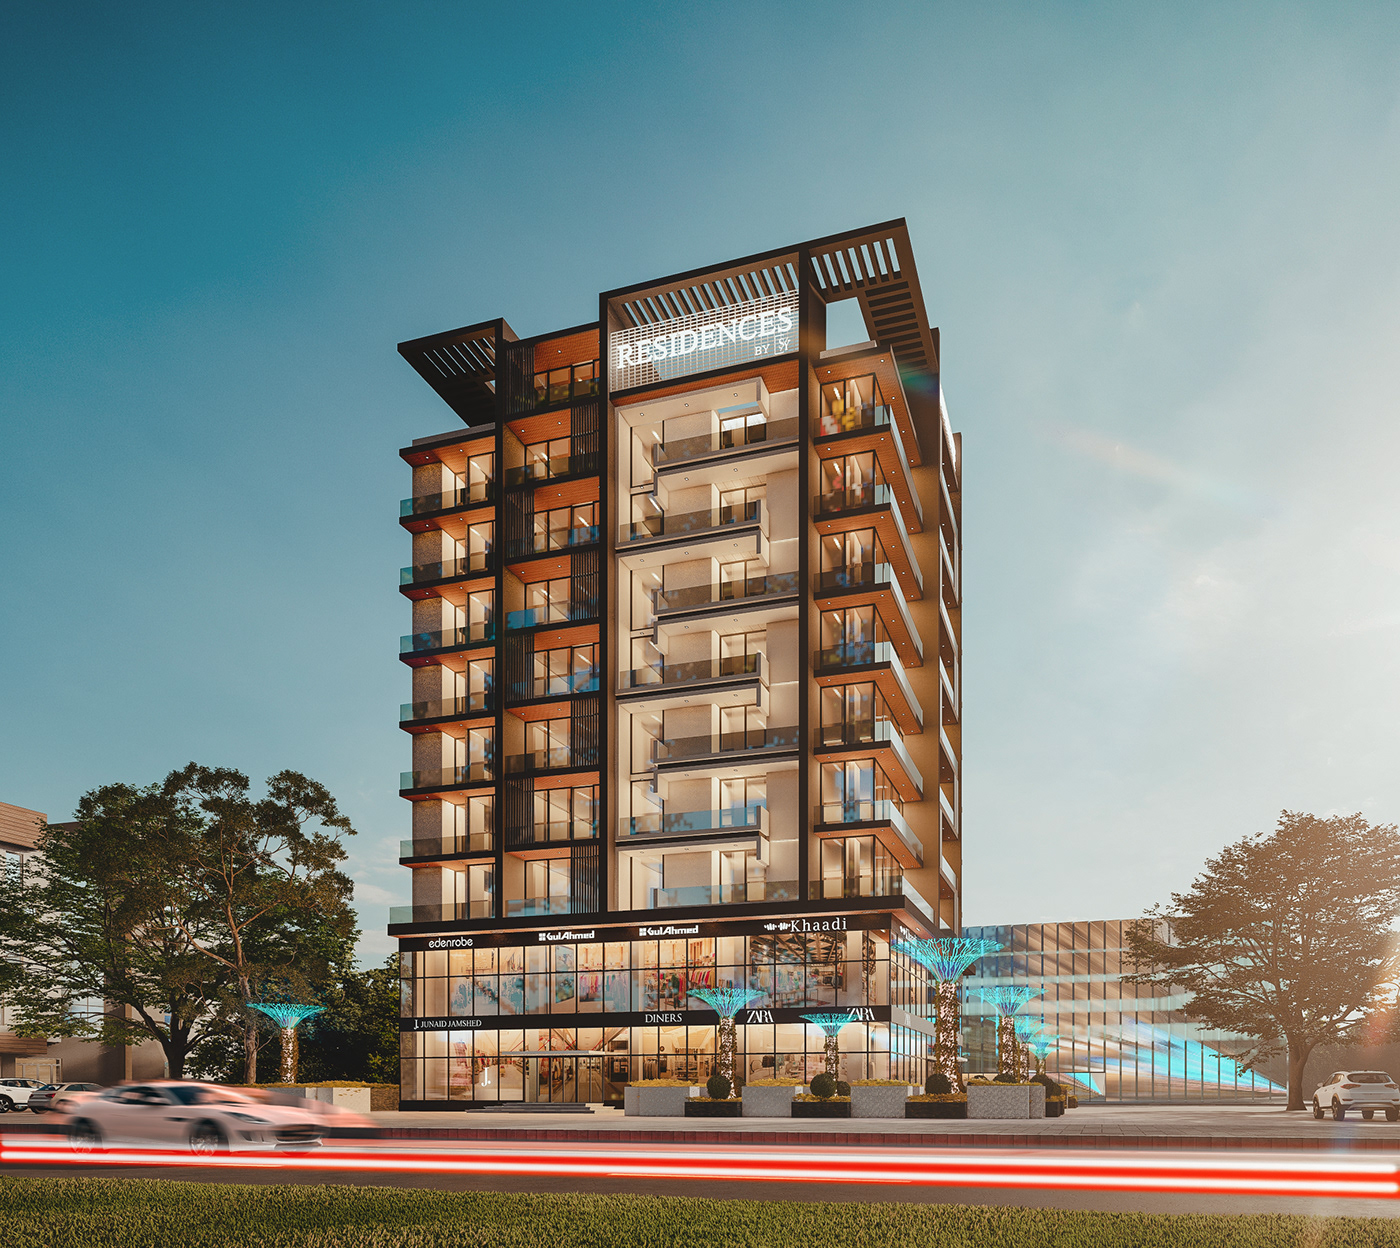 "3D render of a modern apartment building with sleek architectural design and multiple floors."